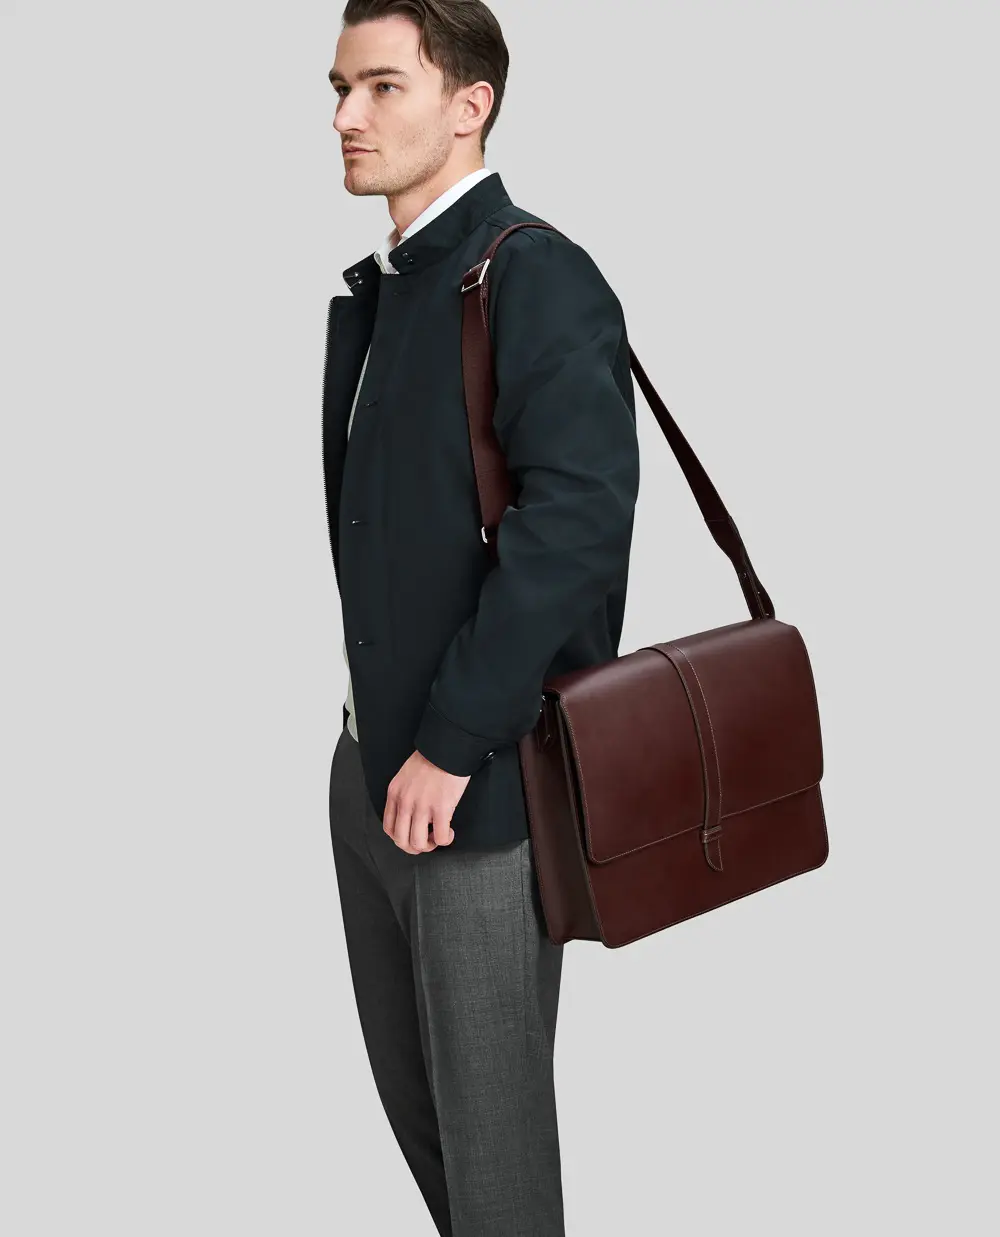 Leather Messenger Bags  ClassyLeatherBags  Classy Leather Bags